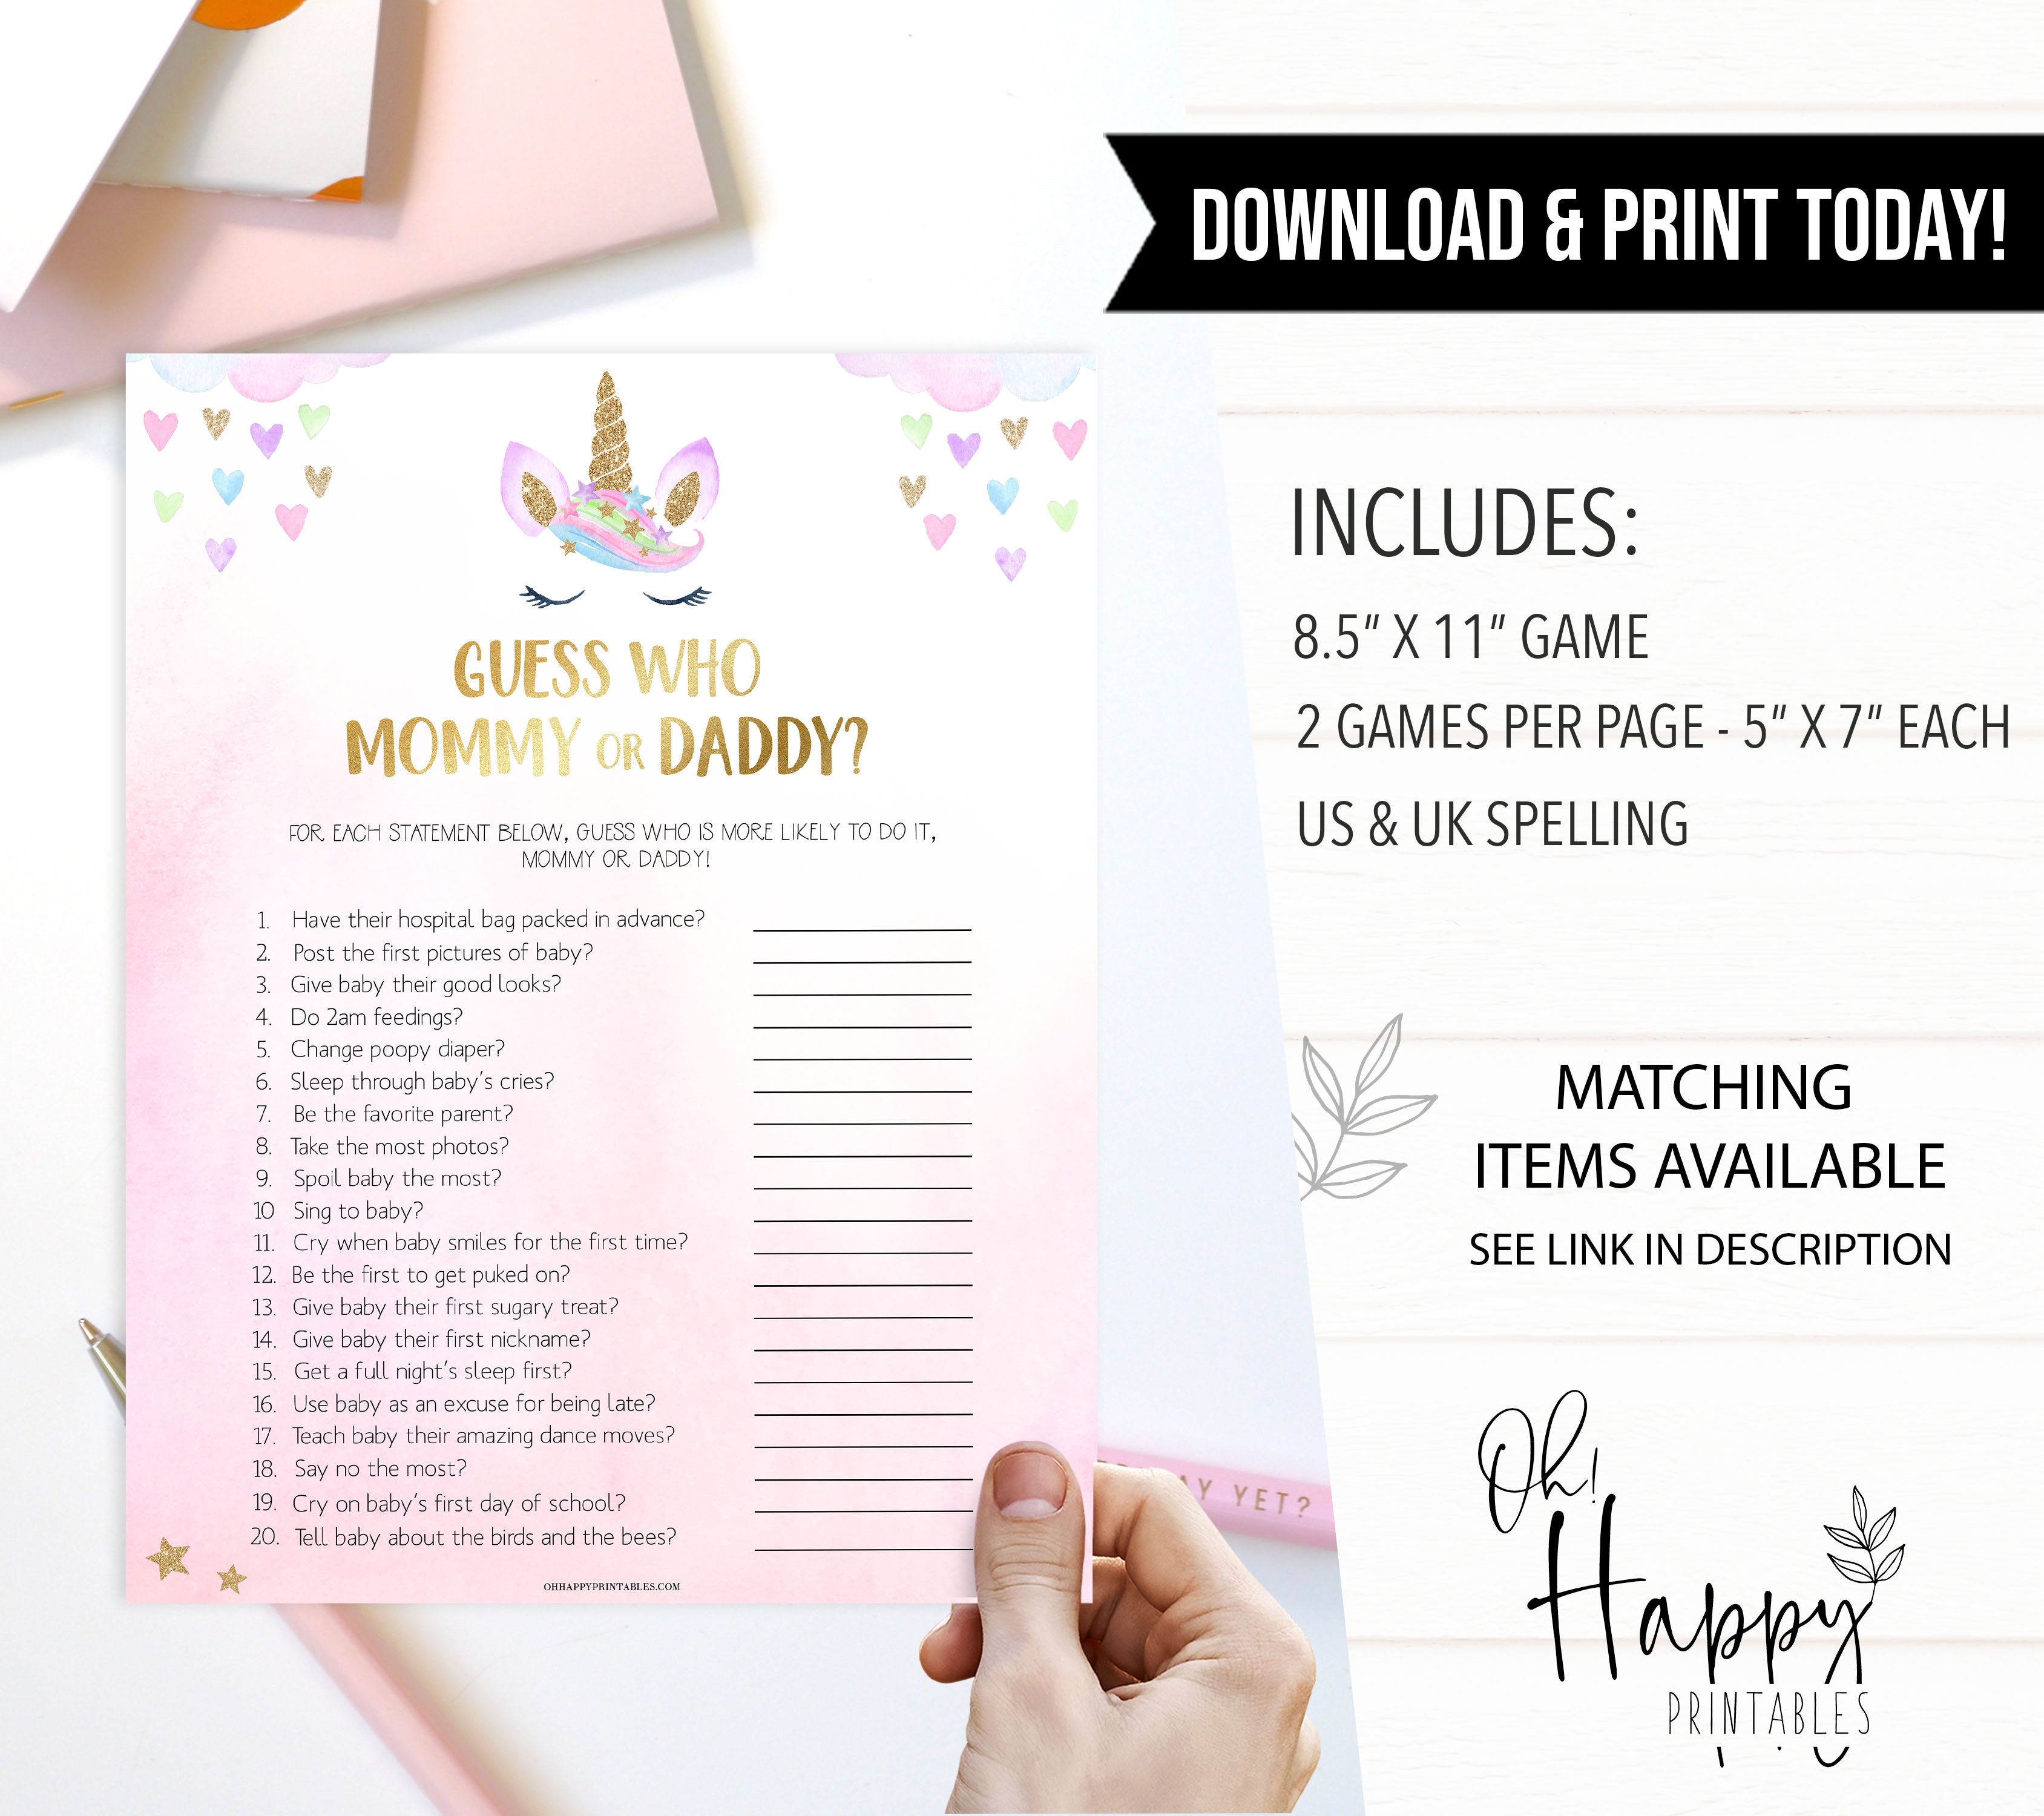 guess who said it baby game, Printable baby shower games, unicorn baby games, baby shower games, fun baby shower ideas, top baby shower ideas, unicorn baby shower, baby shower games, fun unicorn baby shower ideas